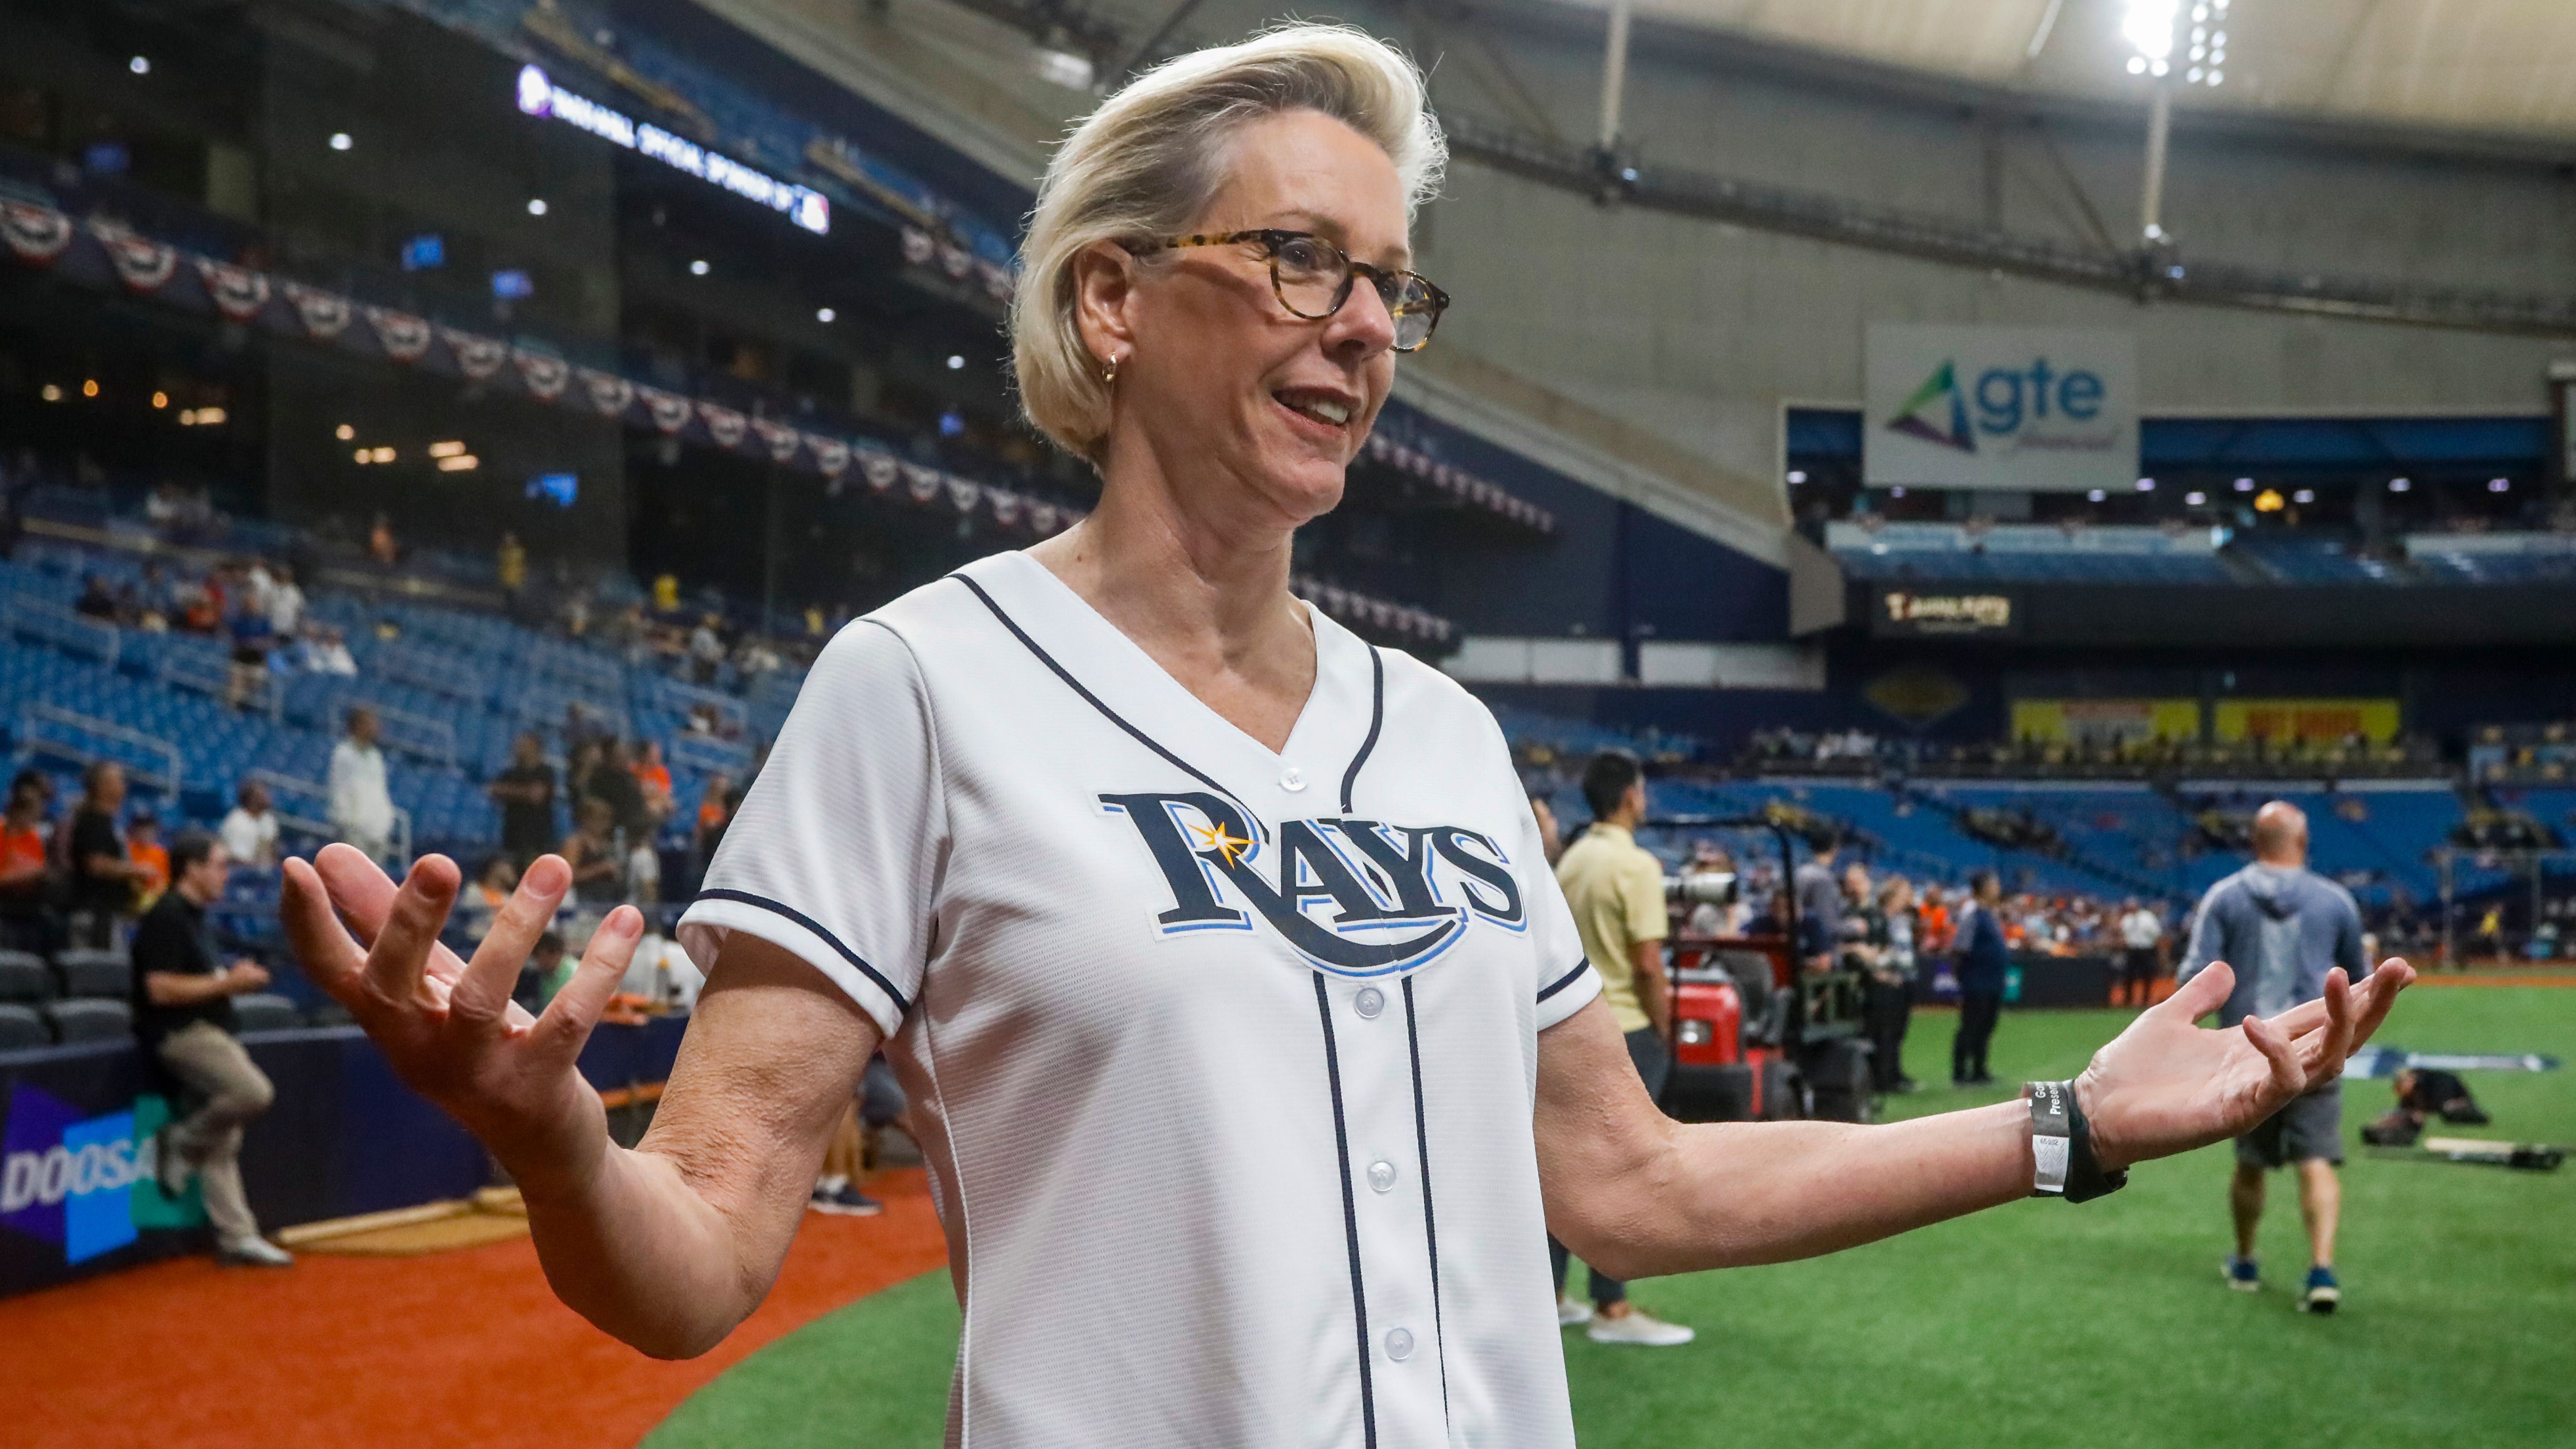 Mayor Jane Castor says she's coming around to sharing the Rays with Montreal